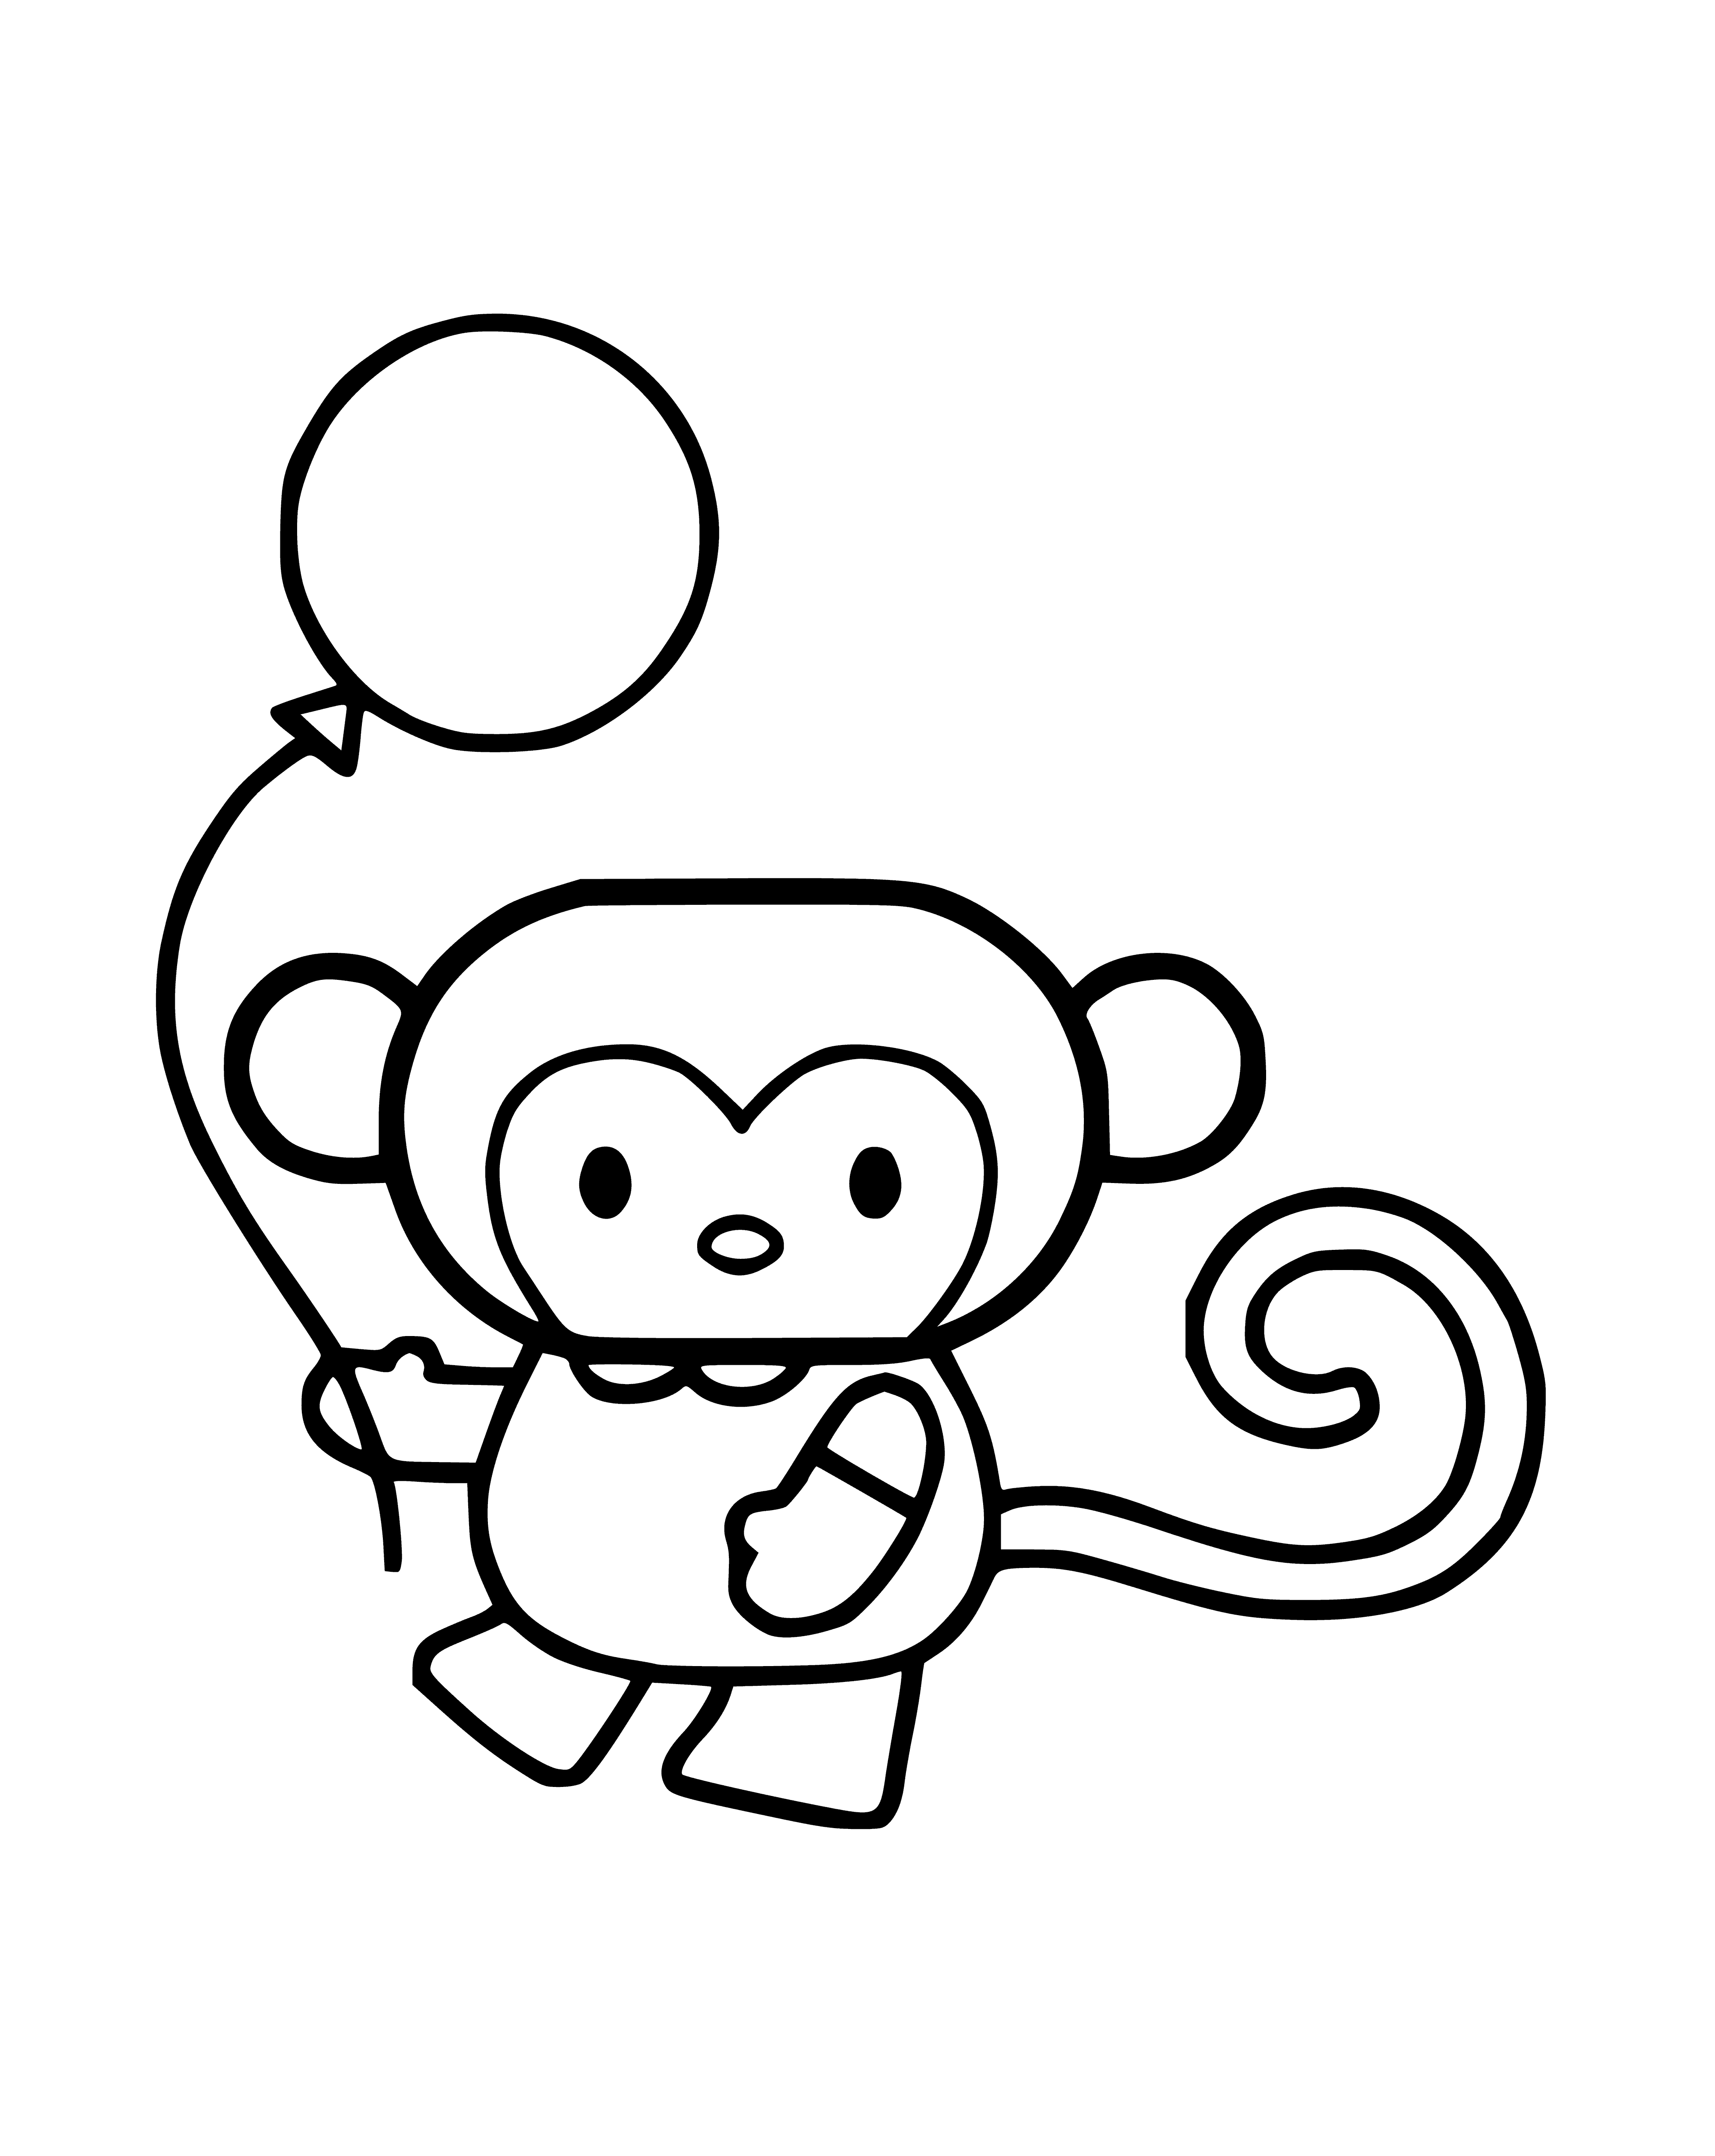 Monkey with a ball coloring page